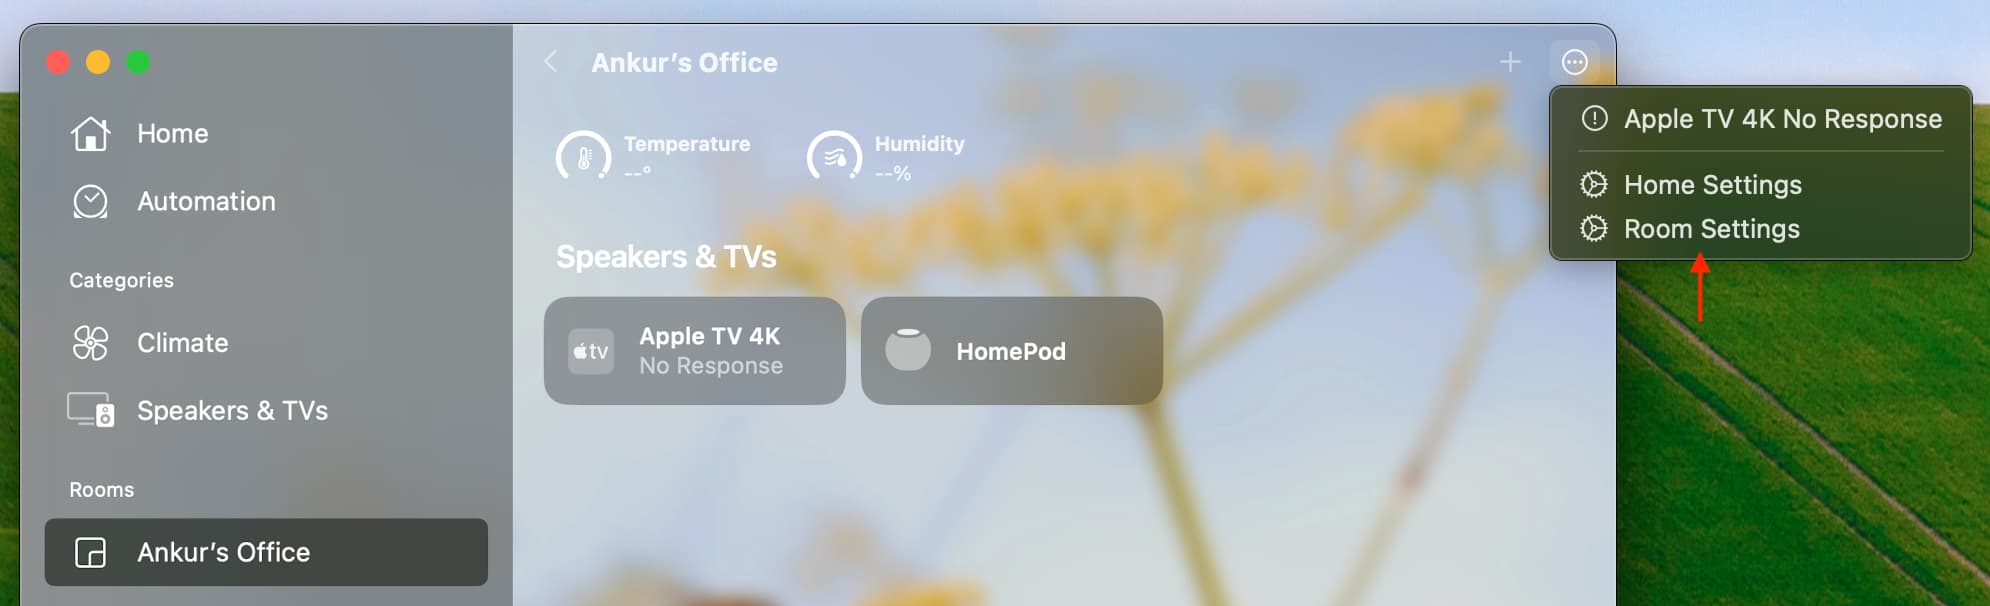 Home Settings and Room Settings in Home app on Mac